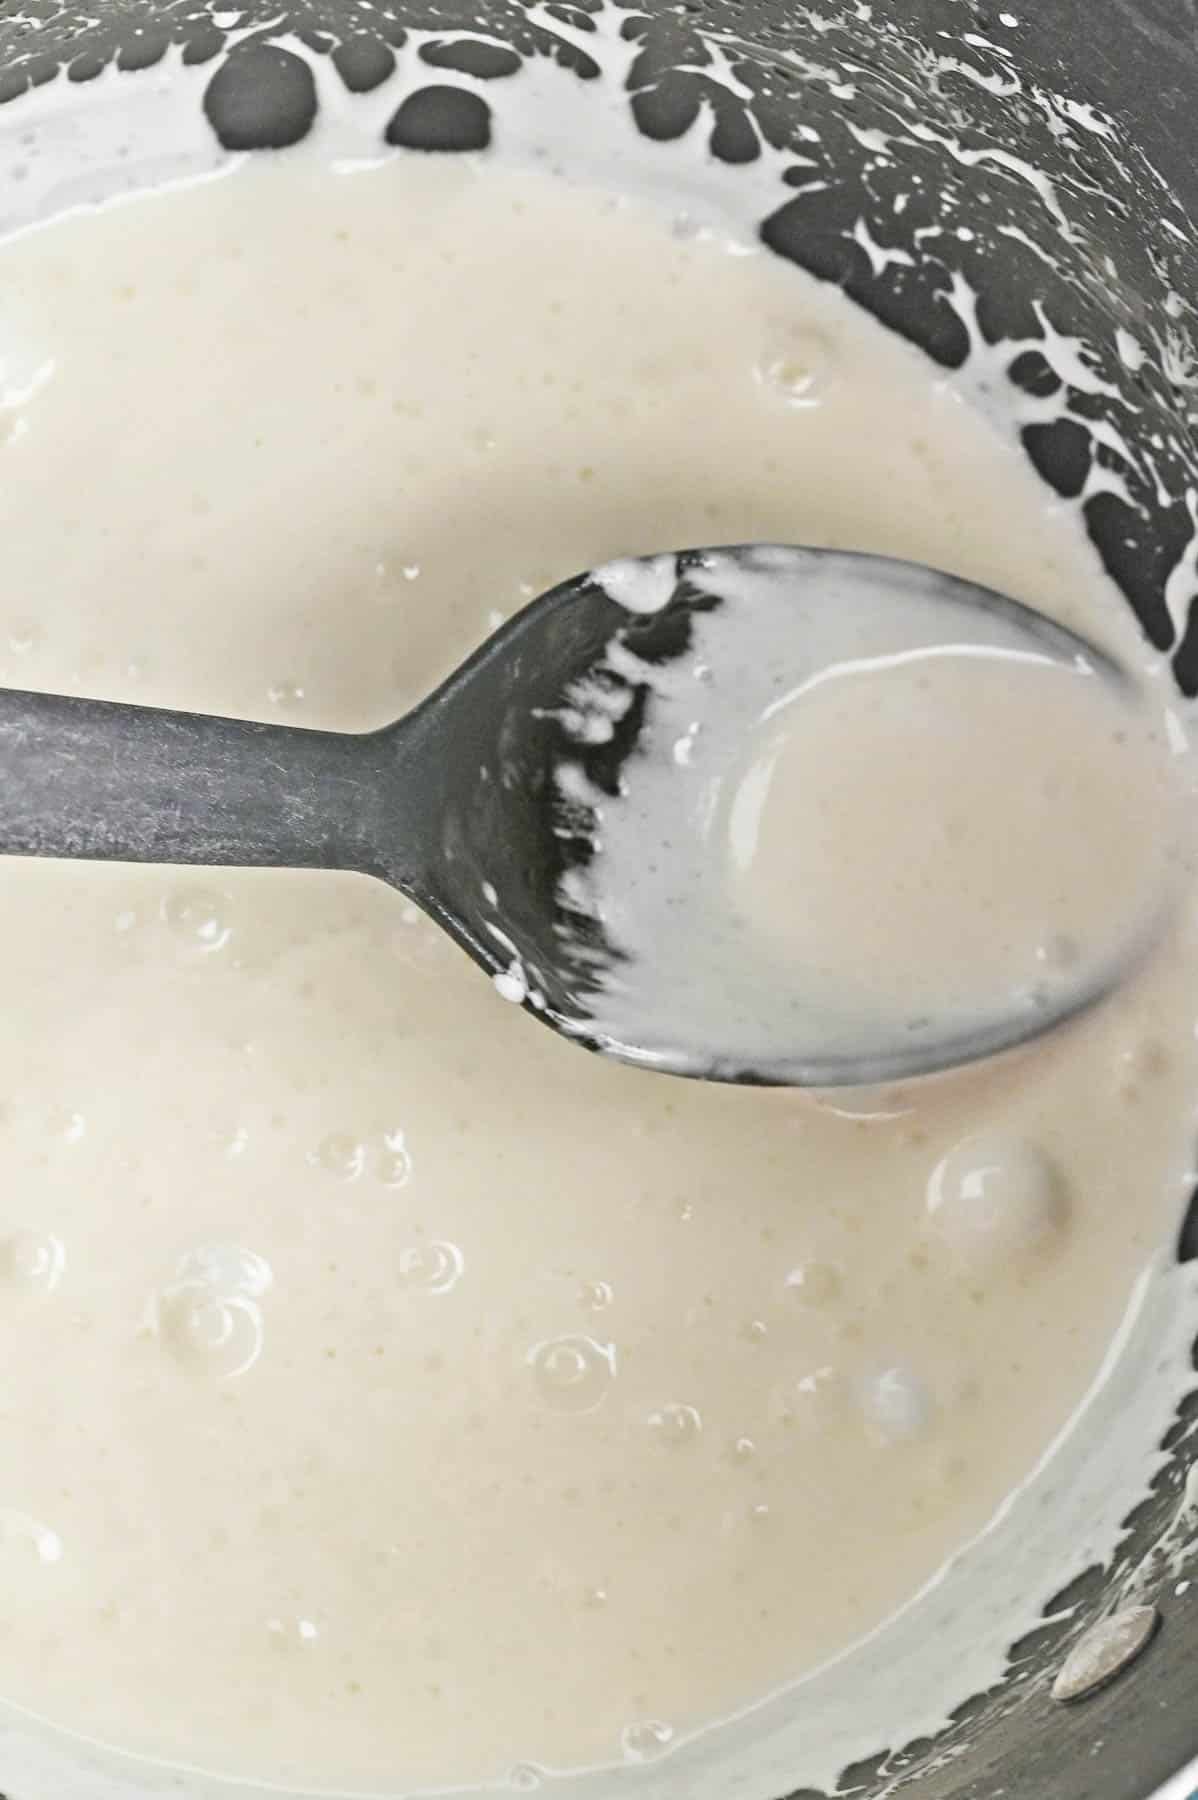 A spoon is being used to stir a bowl of melted white candy wafers.